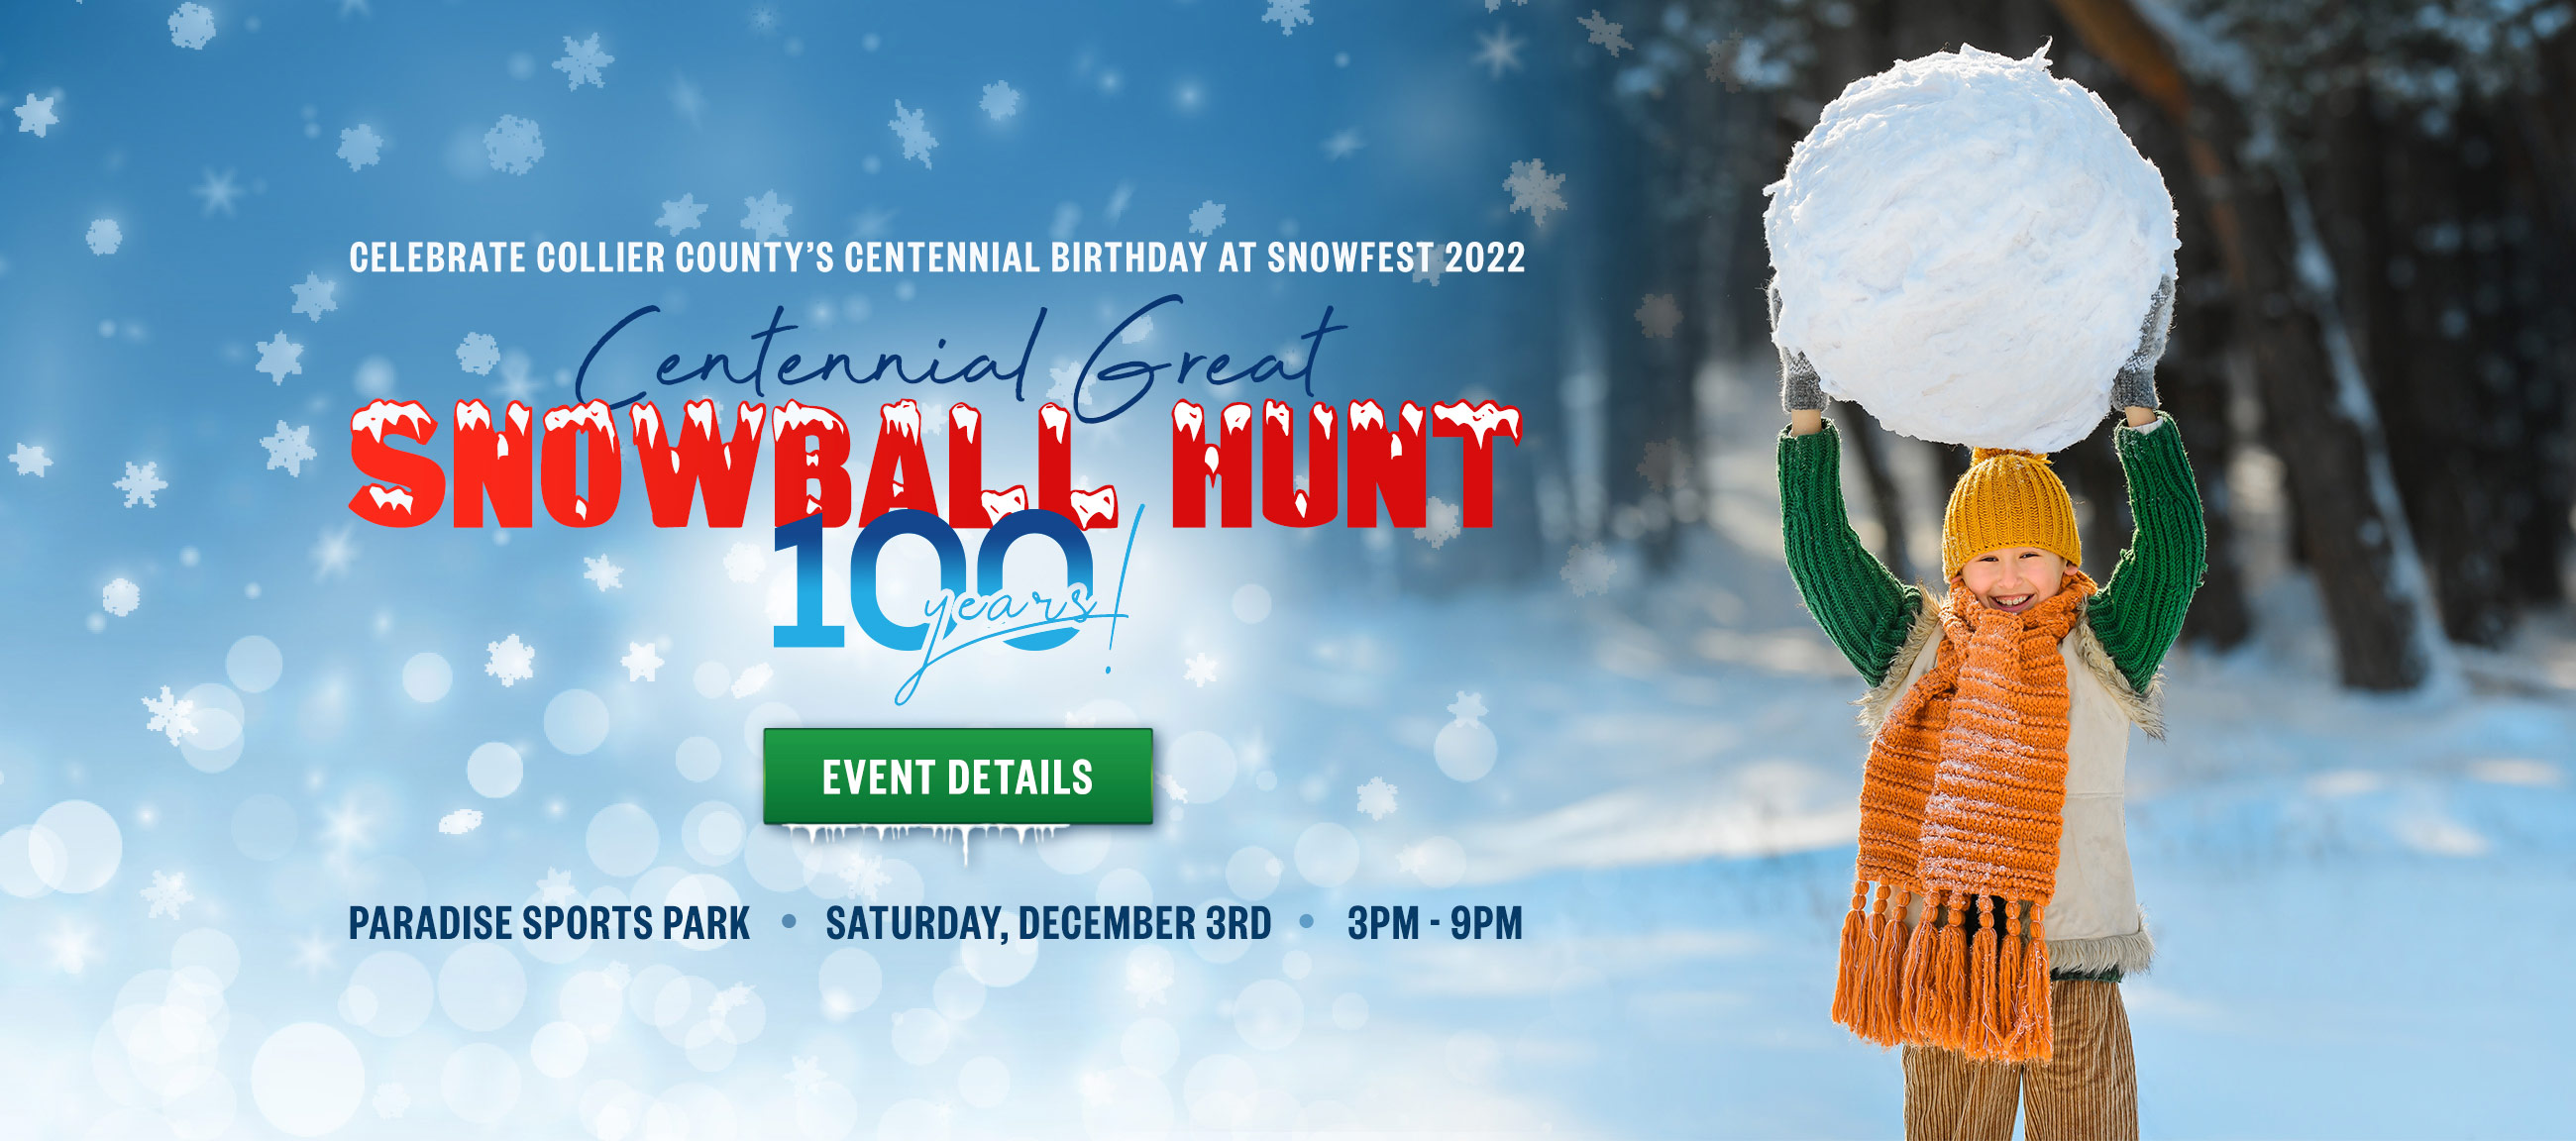 Celebrate Collier County’s Centennial Birthday at SnowFest 2022, Paradise Sports Park, Saturday, December 3rd at 3pm - 9pm